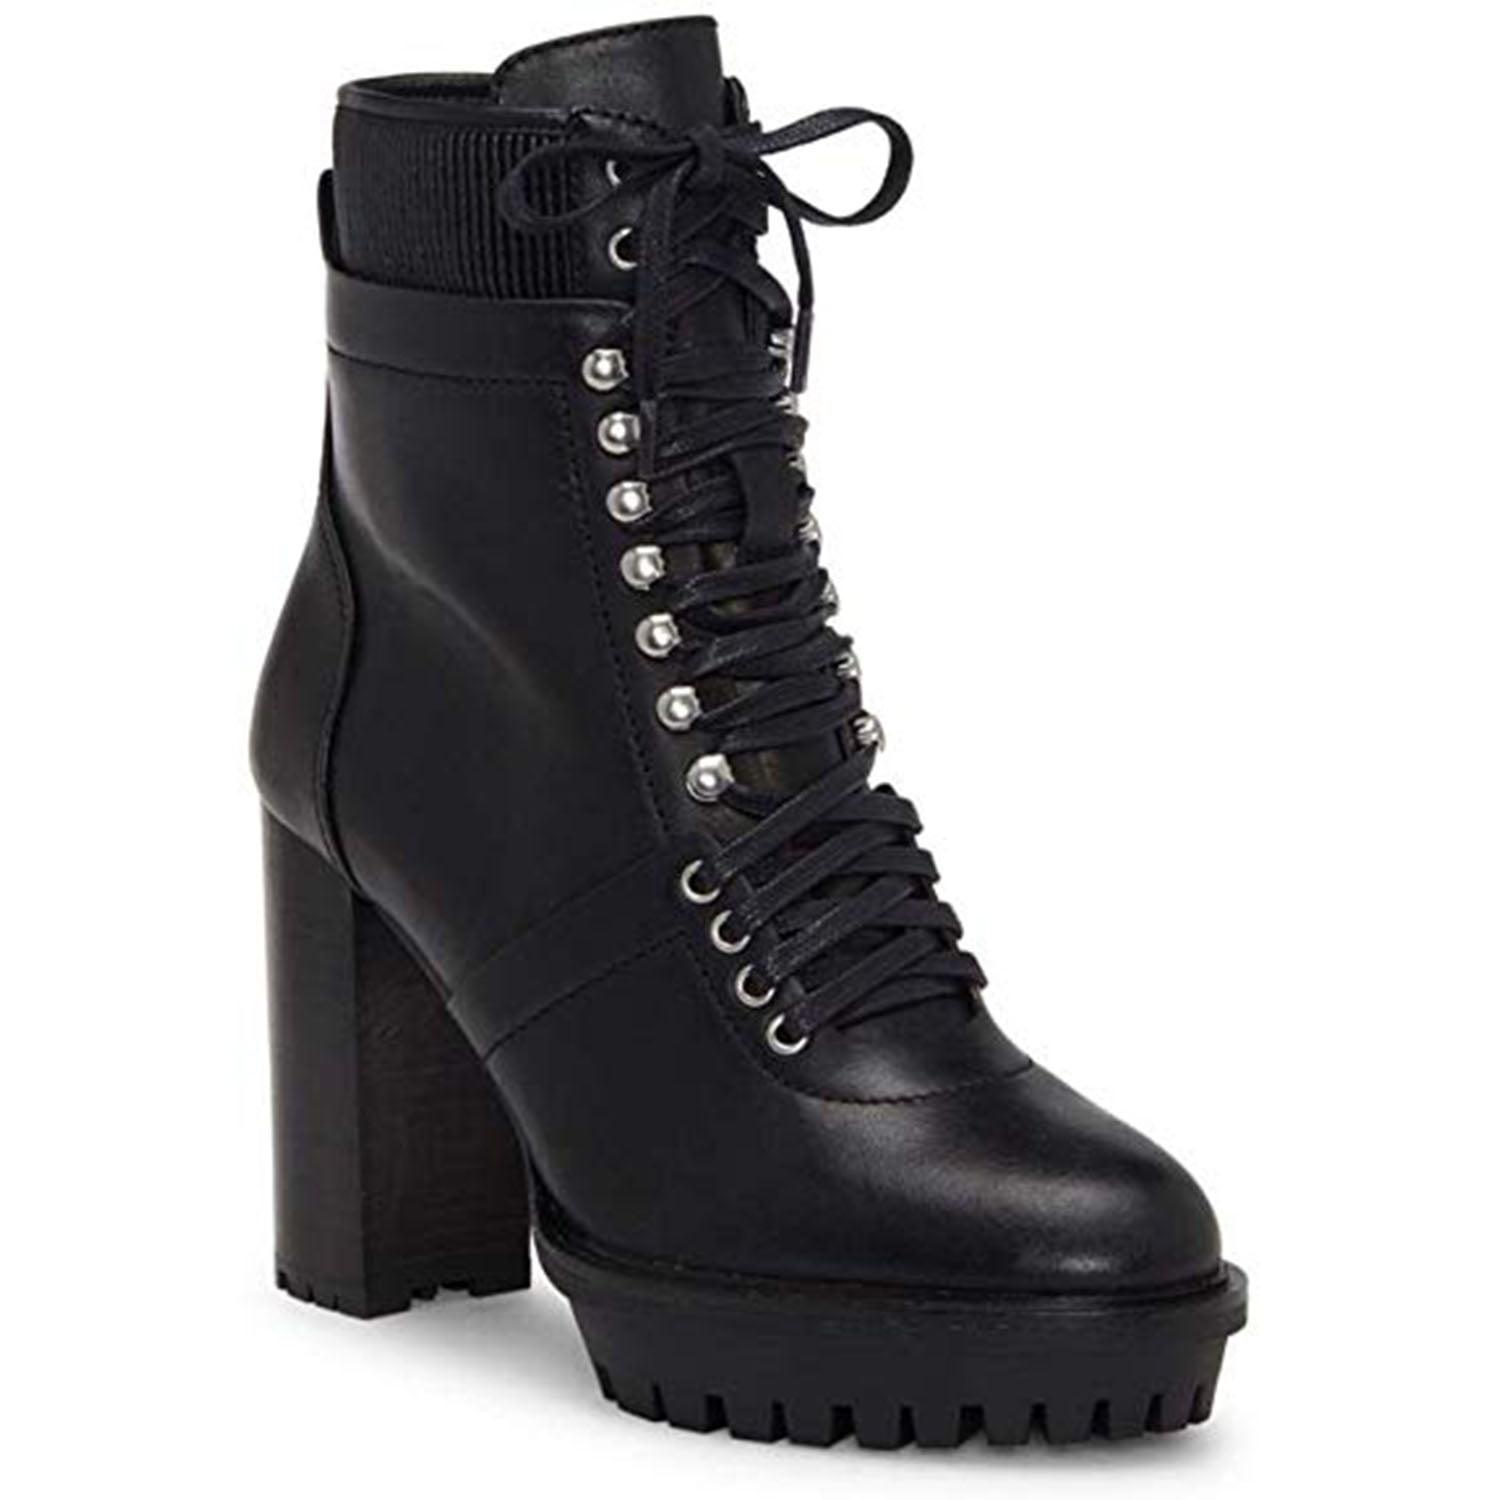 Vince Camuto Women's Ermania Leather Platform Lace-Up Fashion Bootie ...